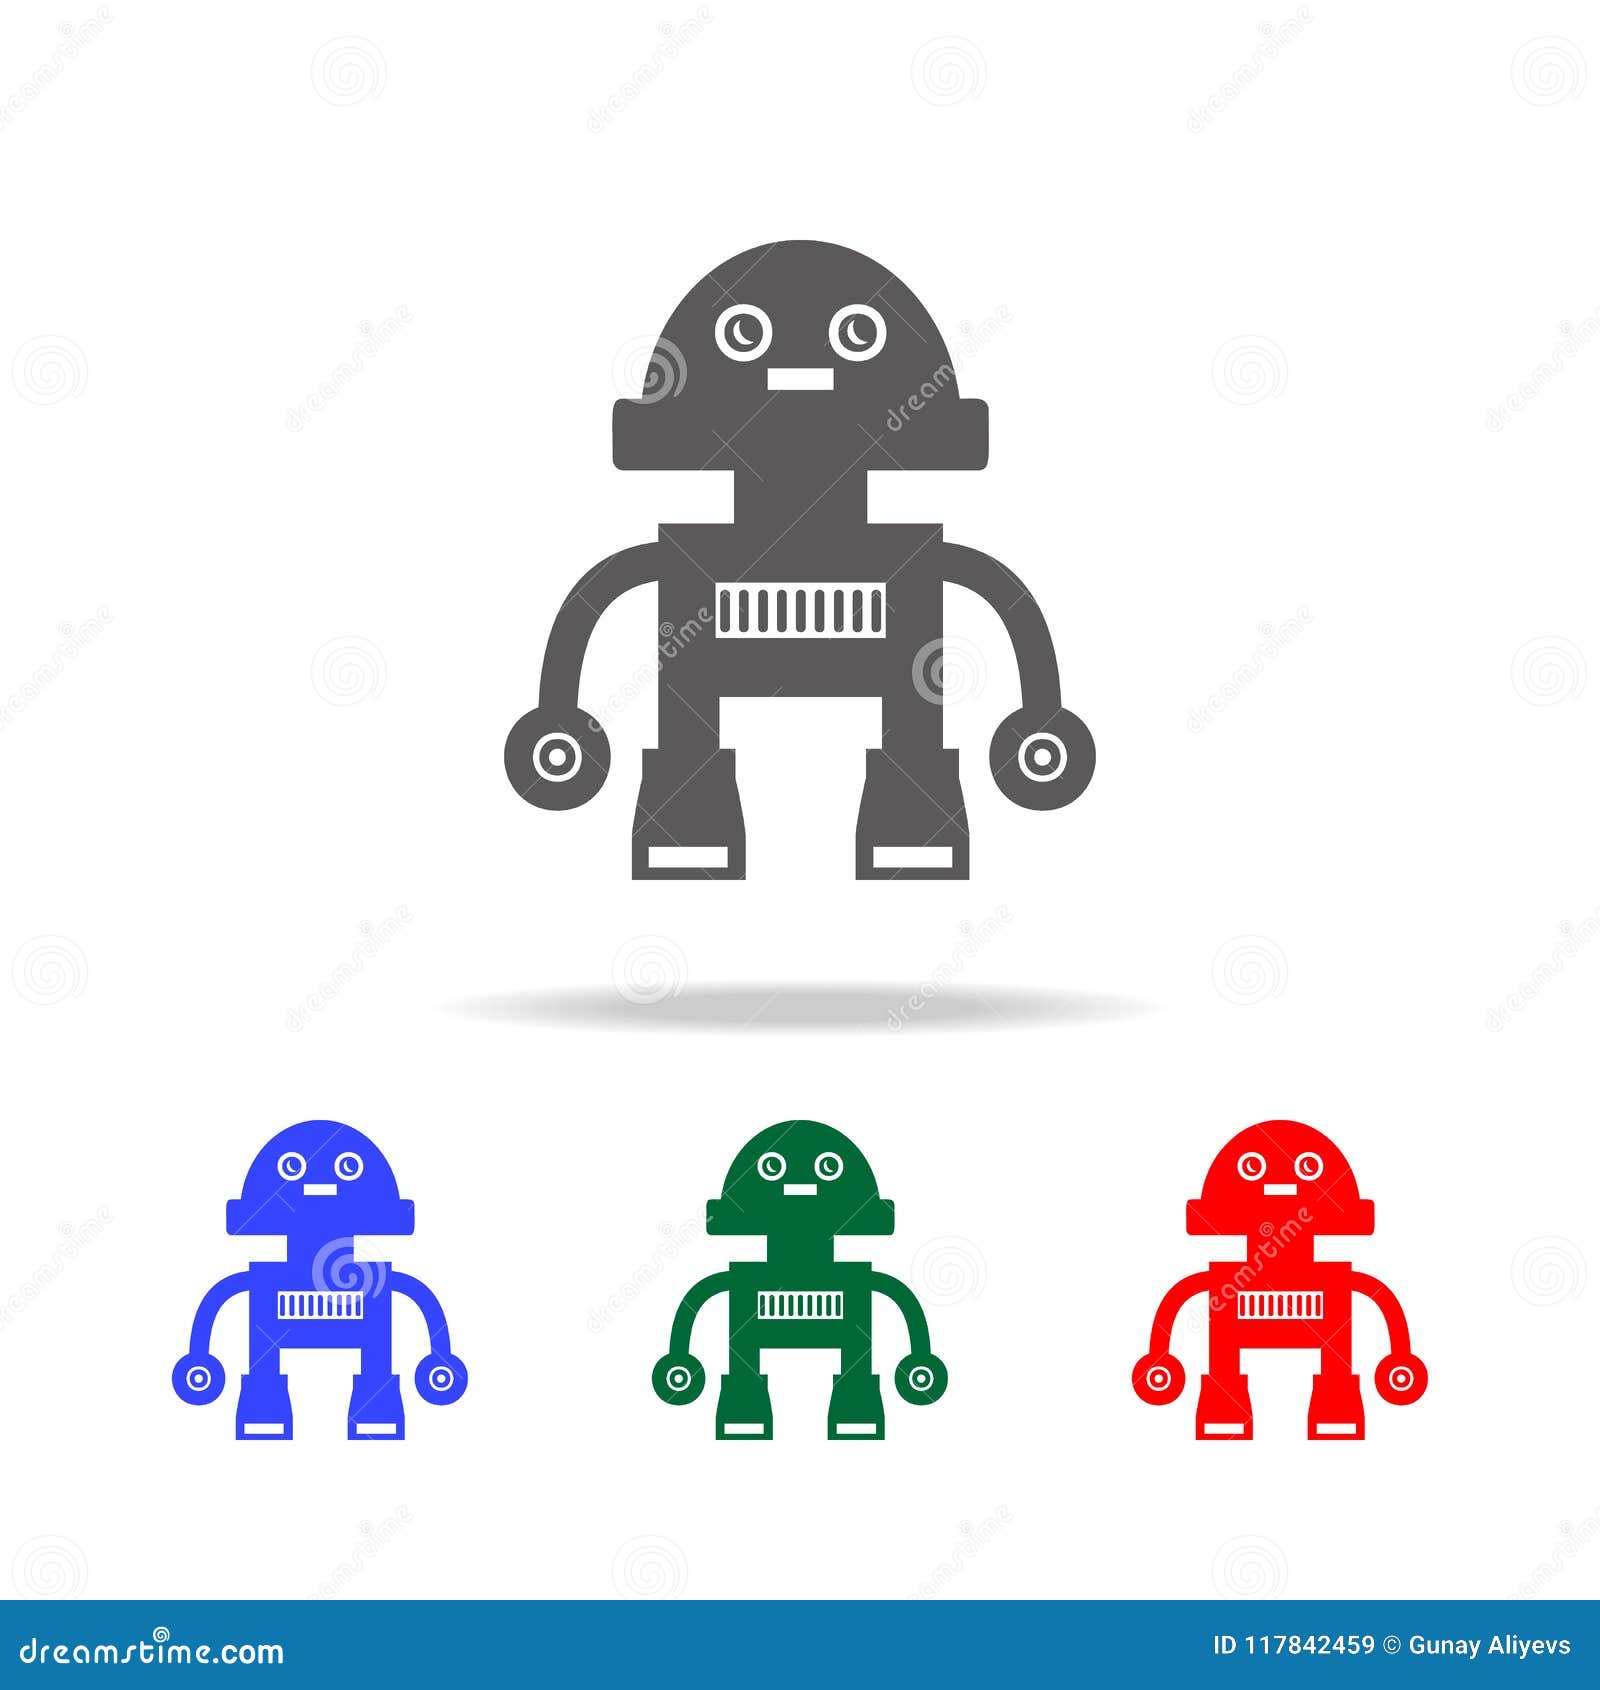 Soar Skylight dragt Cute Robot Icons. Elements of Robots in Multi Colored Icons. Premium  Quality Graphic Design Icon Stock Illustration - Illustration of design,  logo: 117842459